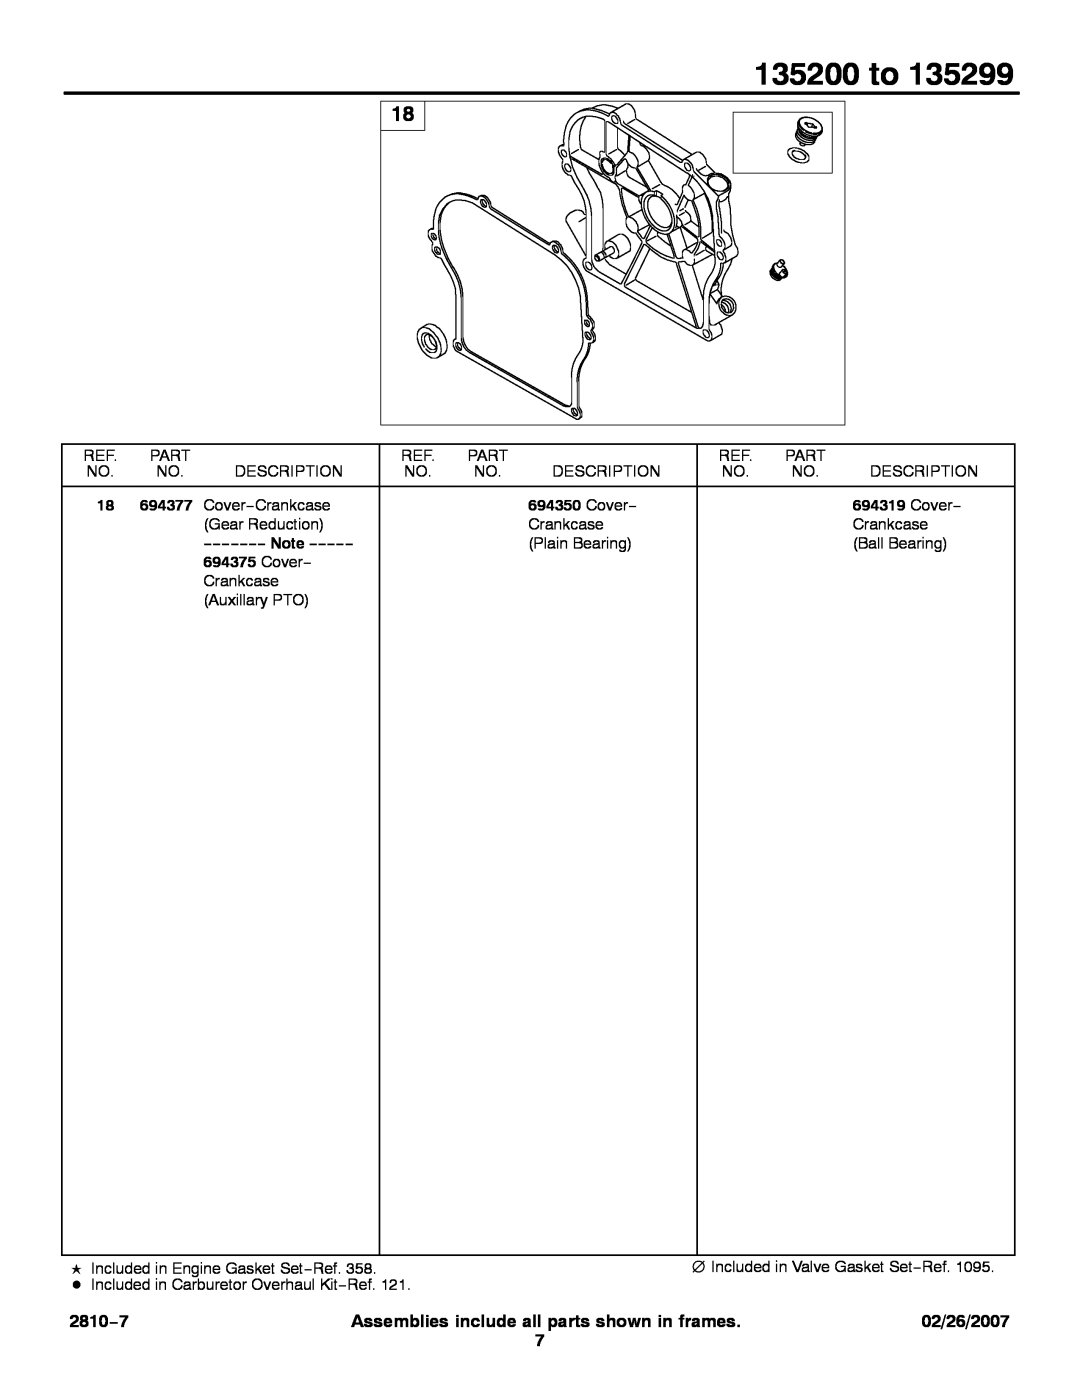 Briggs & Stratton service manual 135200 to, 2810−7, Assemblies include all parts shown in frames, 02/26/2007 